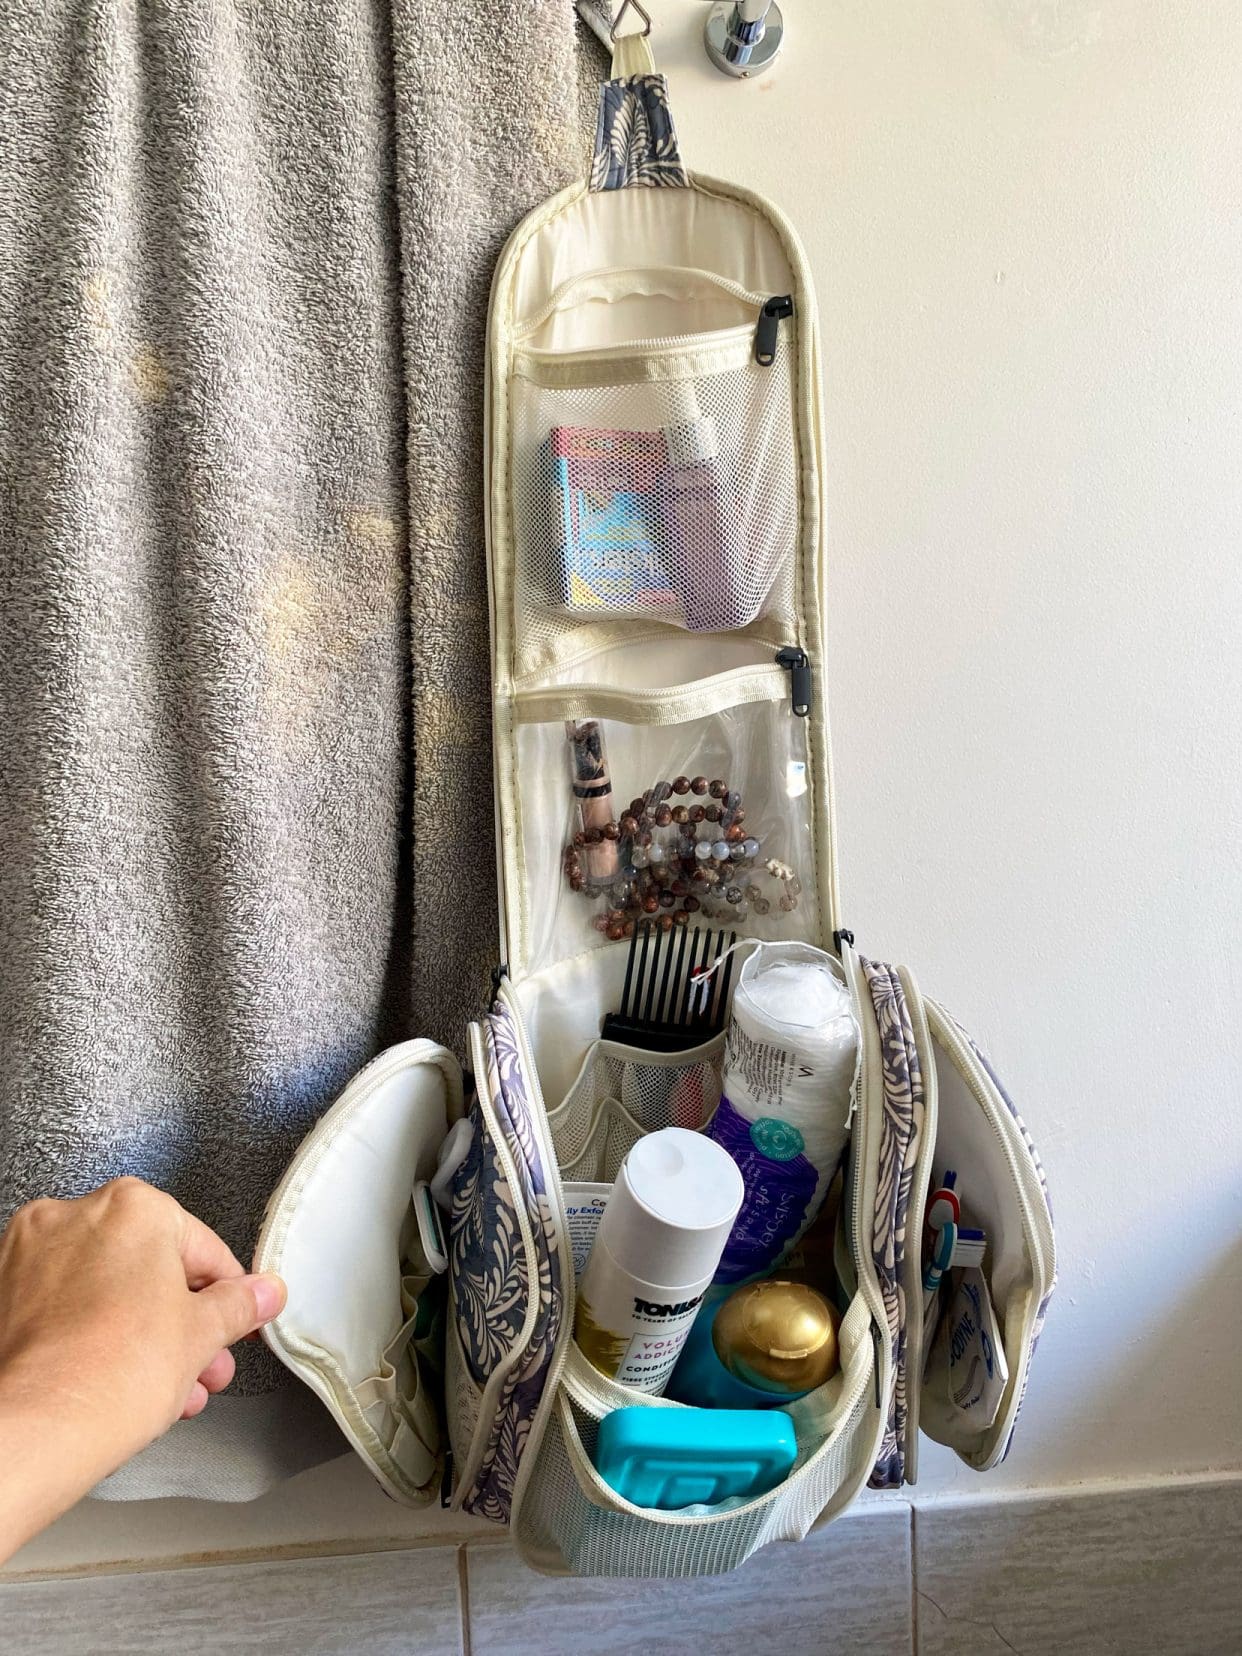 My open toiletry bag showing it in use